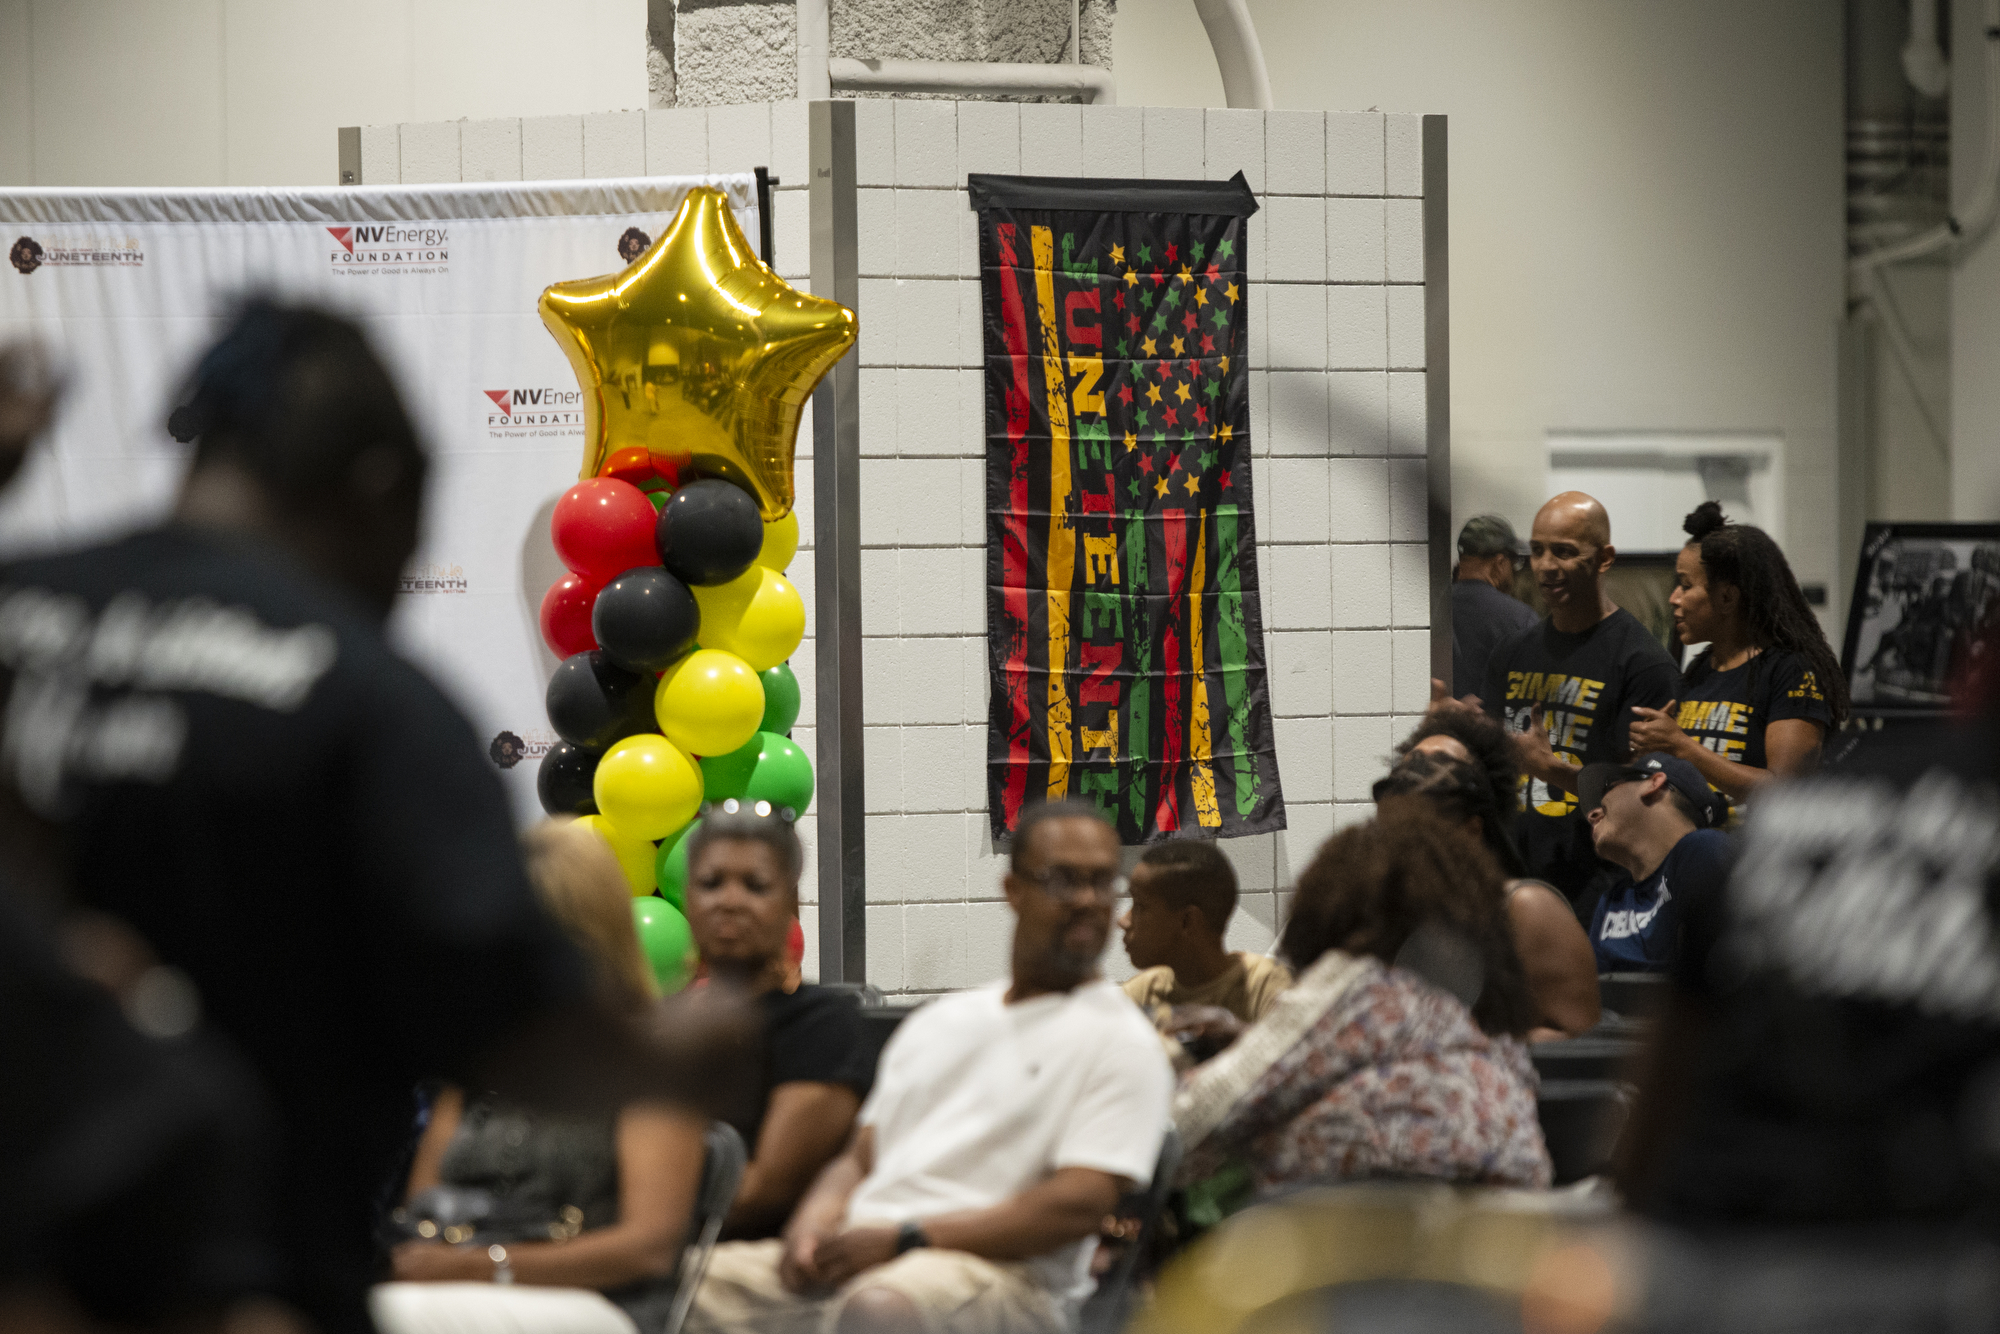 Decorations as seen during a Juneteenth celebration at The Expo in Las Vegas on Saturday, June 18, 2022. (Daniel Clark/The Nevada Independent).